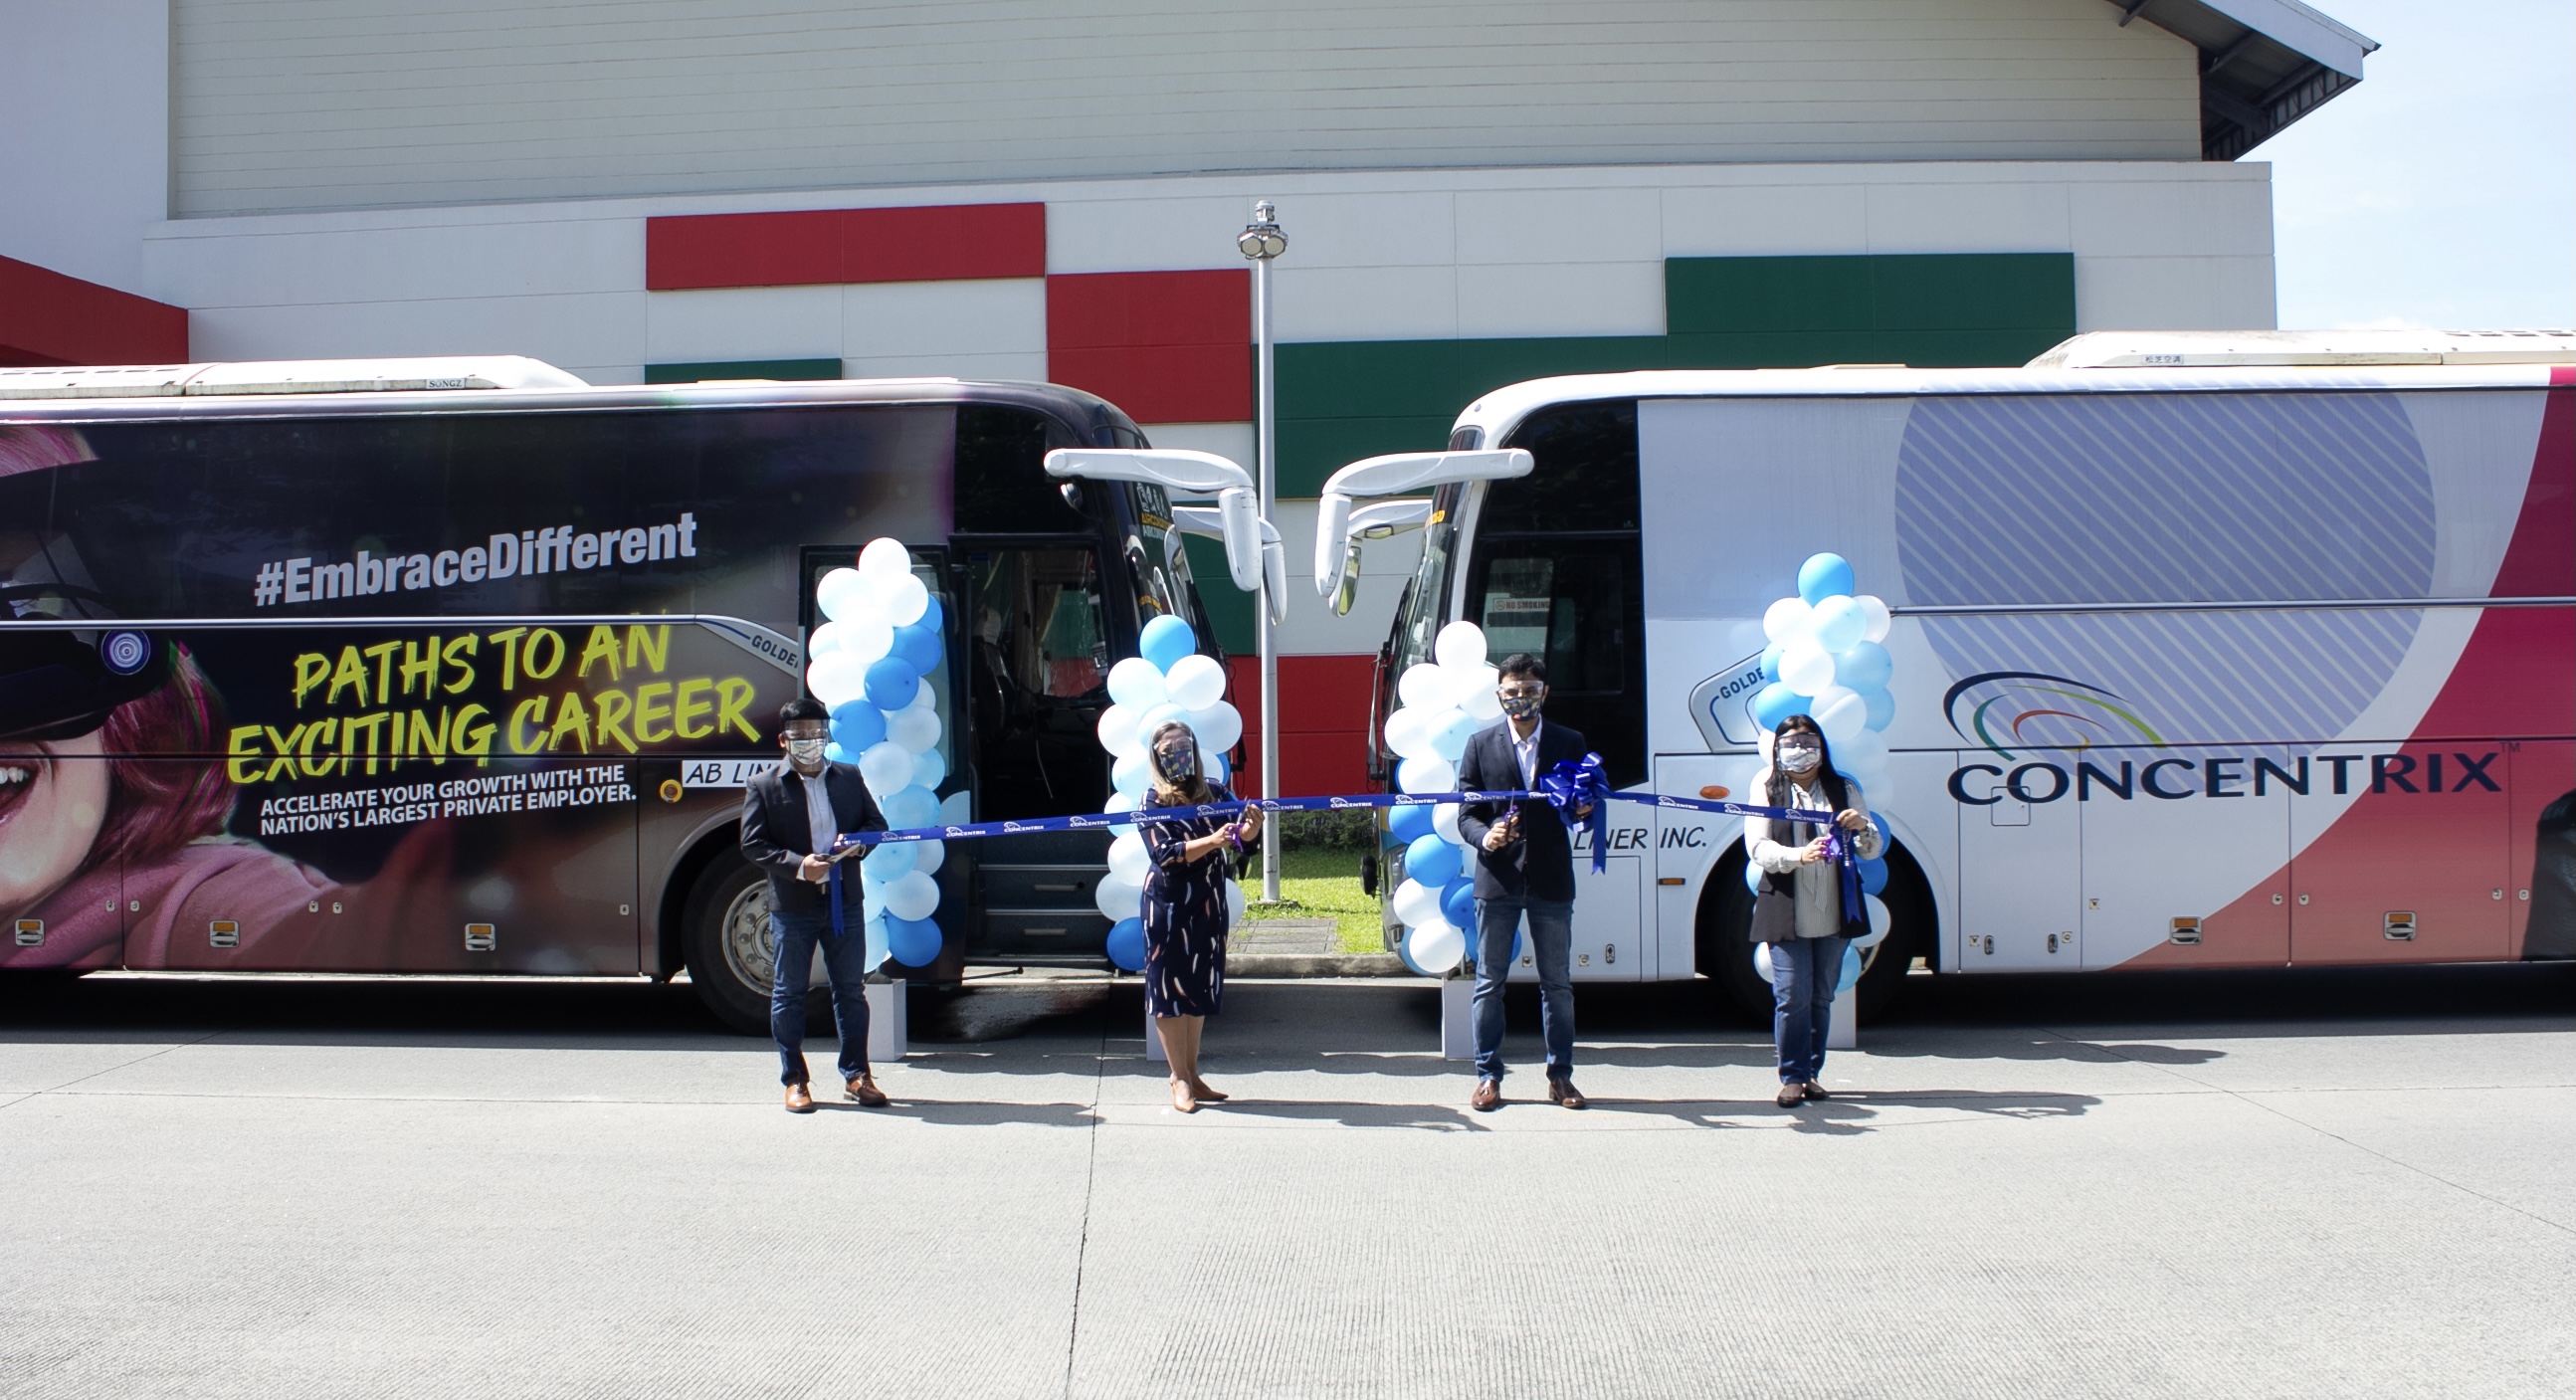 Concentrix Expands Staff Transport with Dedicated, Free Buses